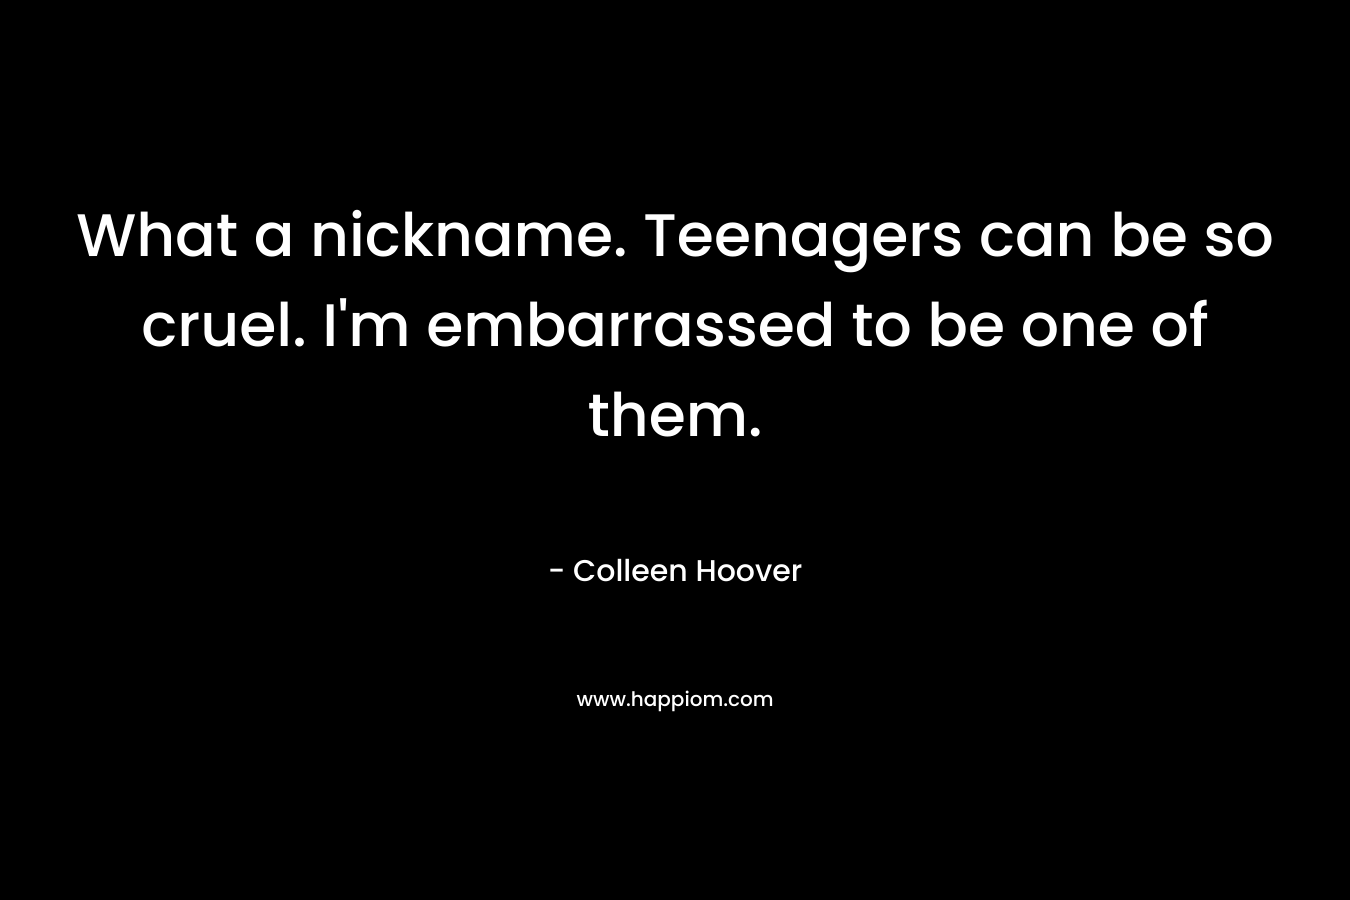 What a nickname. Teenagers can be so cruel. I’m embarrassed to be one of them. – Colleen Hoover